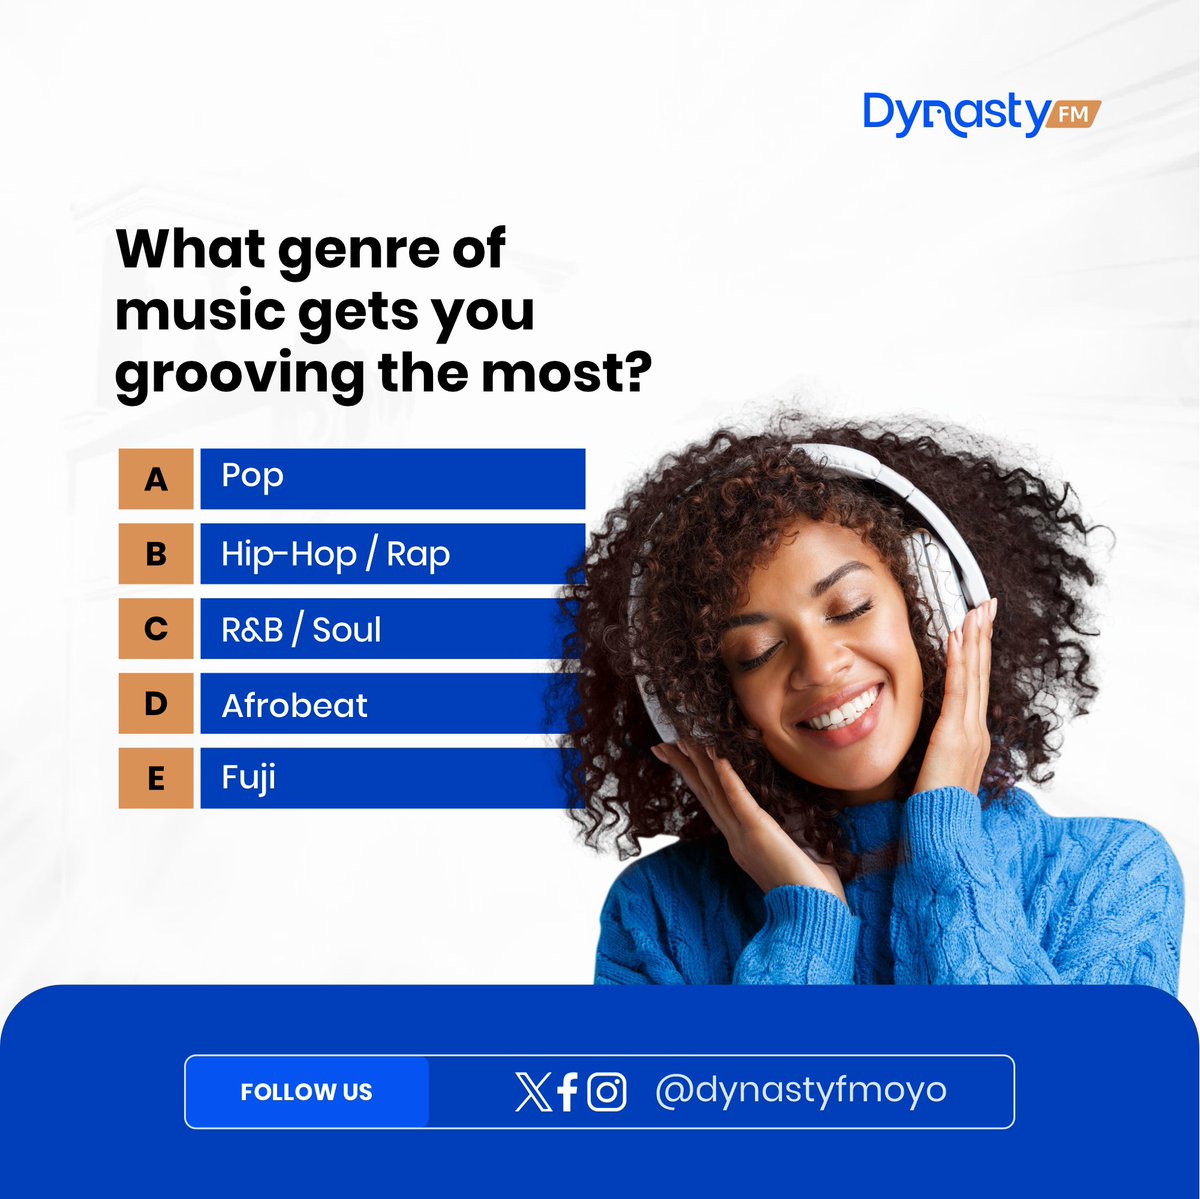 Let's settle the debate: what's your go-to music genre? Cast your vote in our interactive poll and let's find out which genre reigns supreme! #MusicPoll #DynastyRadio